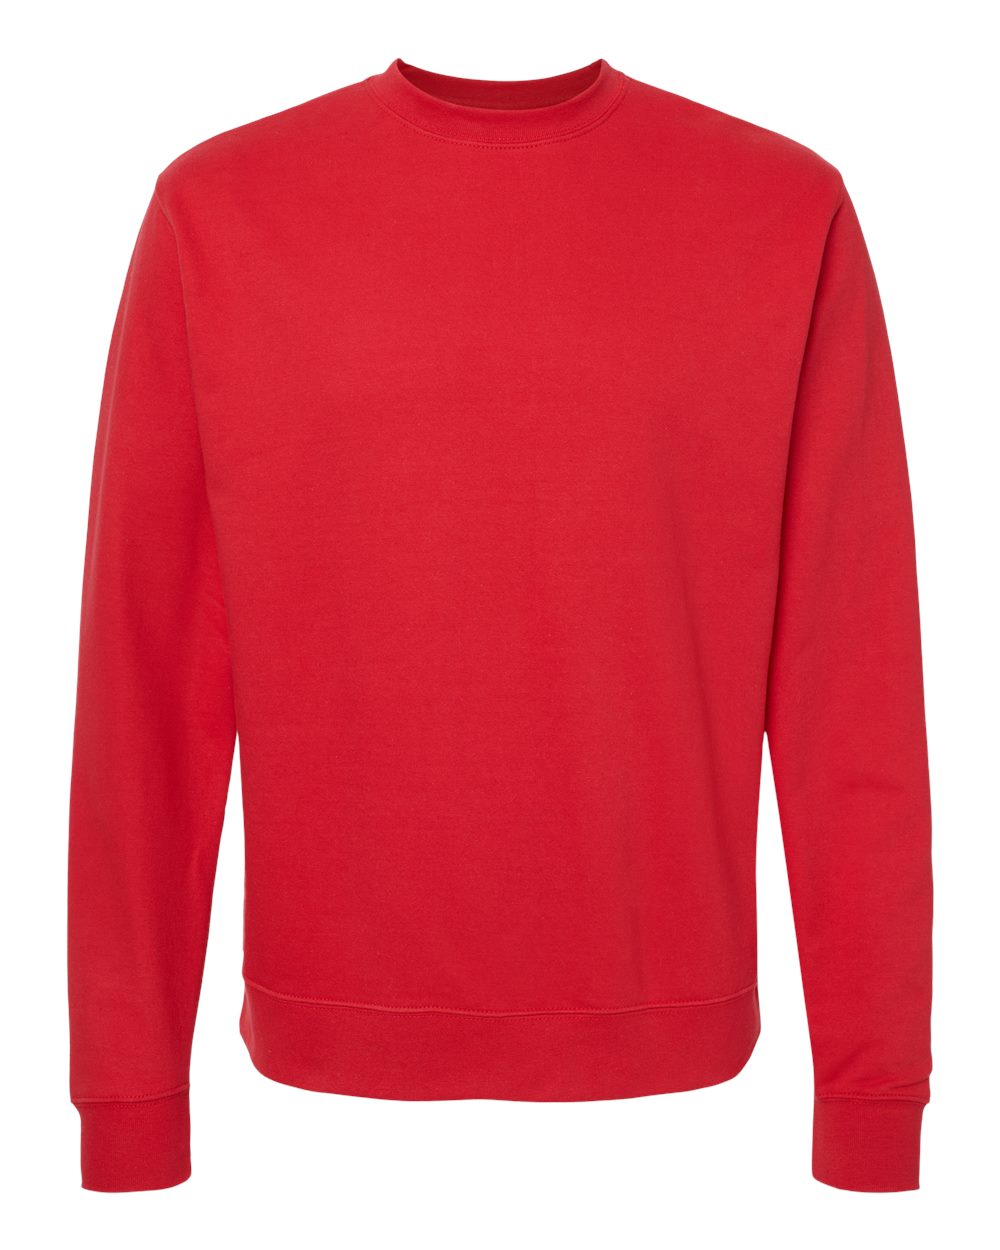 Independent Trading Co. Midweight Sweatshirt SS3000 #color_Red